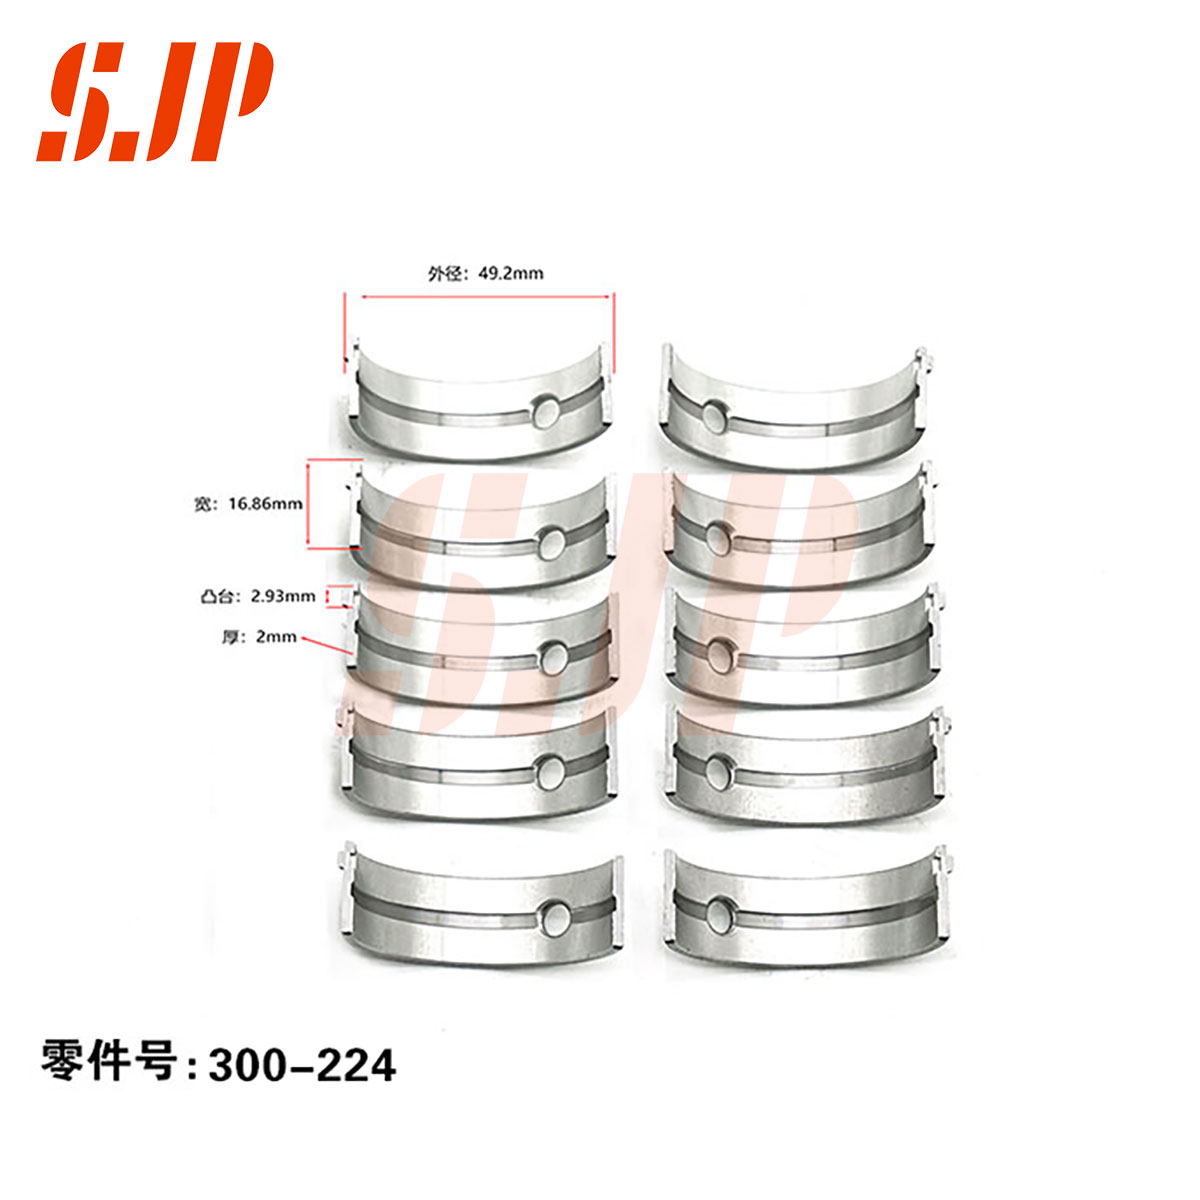 SJ-300-224 Main Bearing Set For SGMW Spark 1.0(Four cylinders)